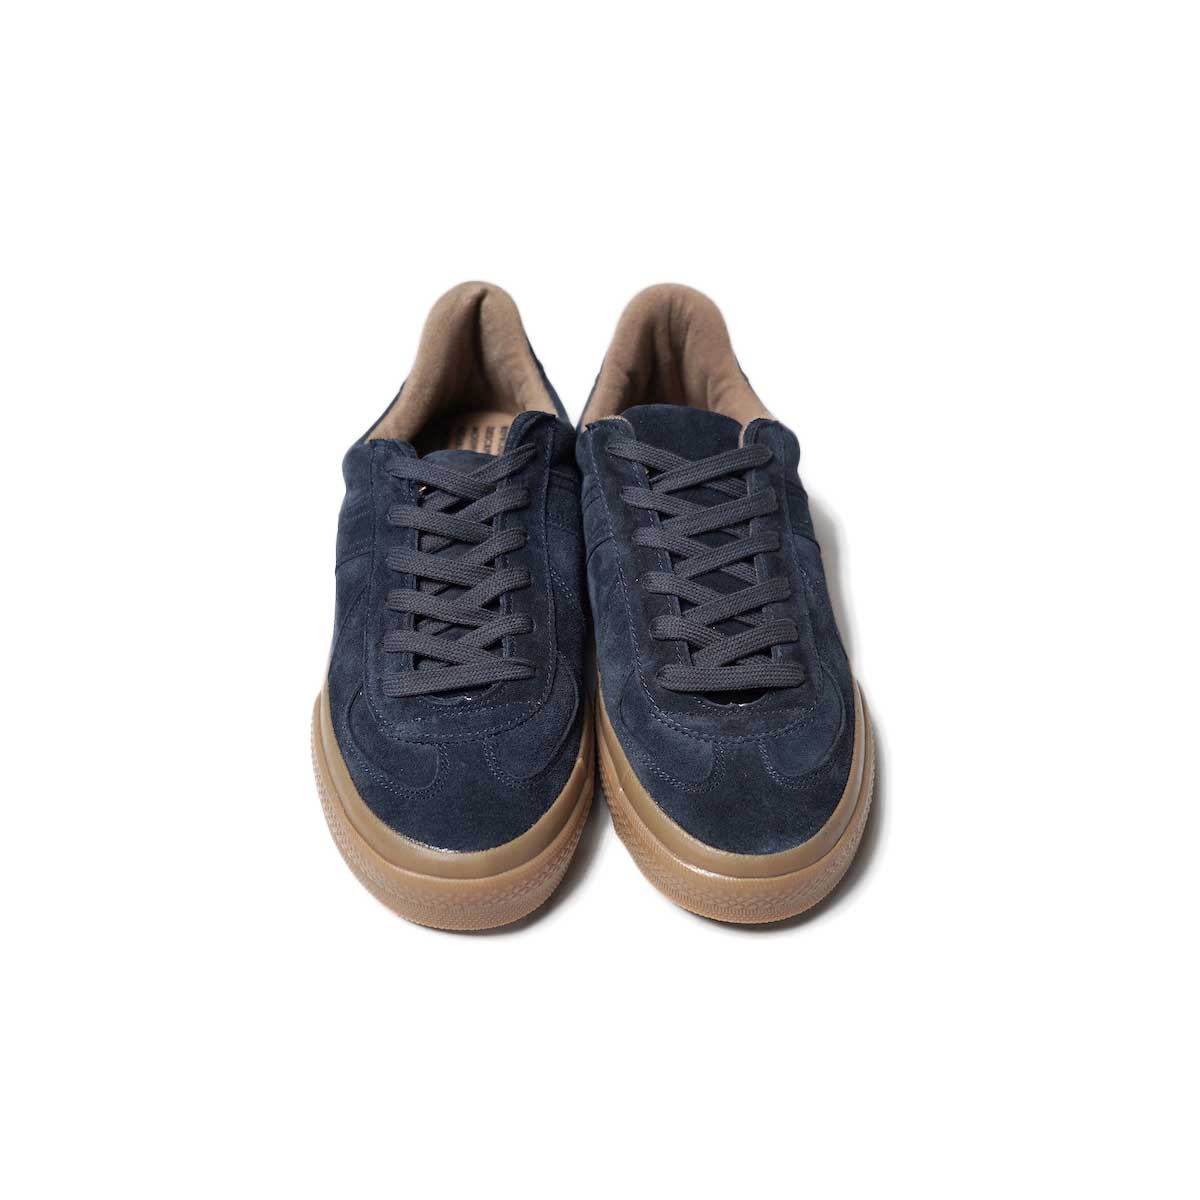 REPRODUCTION OF FOUND / GERMAN MILITARY TRAINER (Dark Navy Suede)上